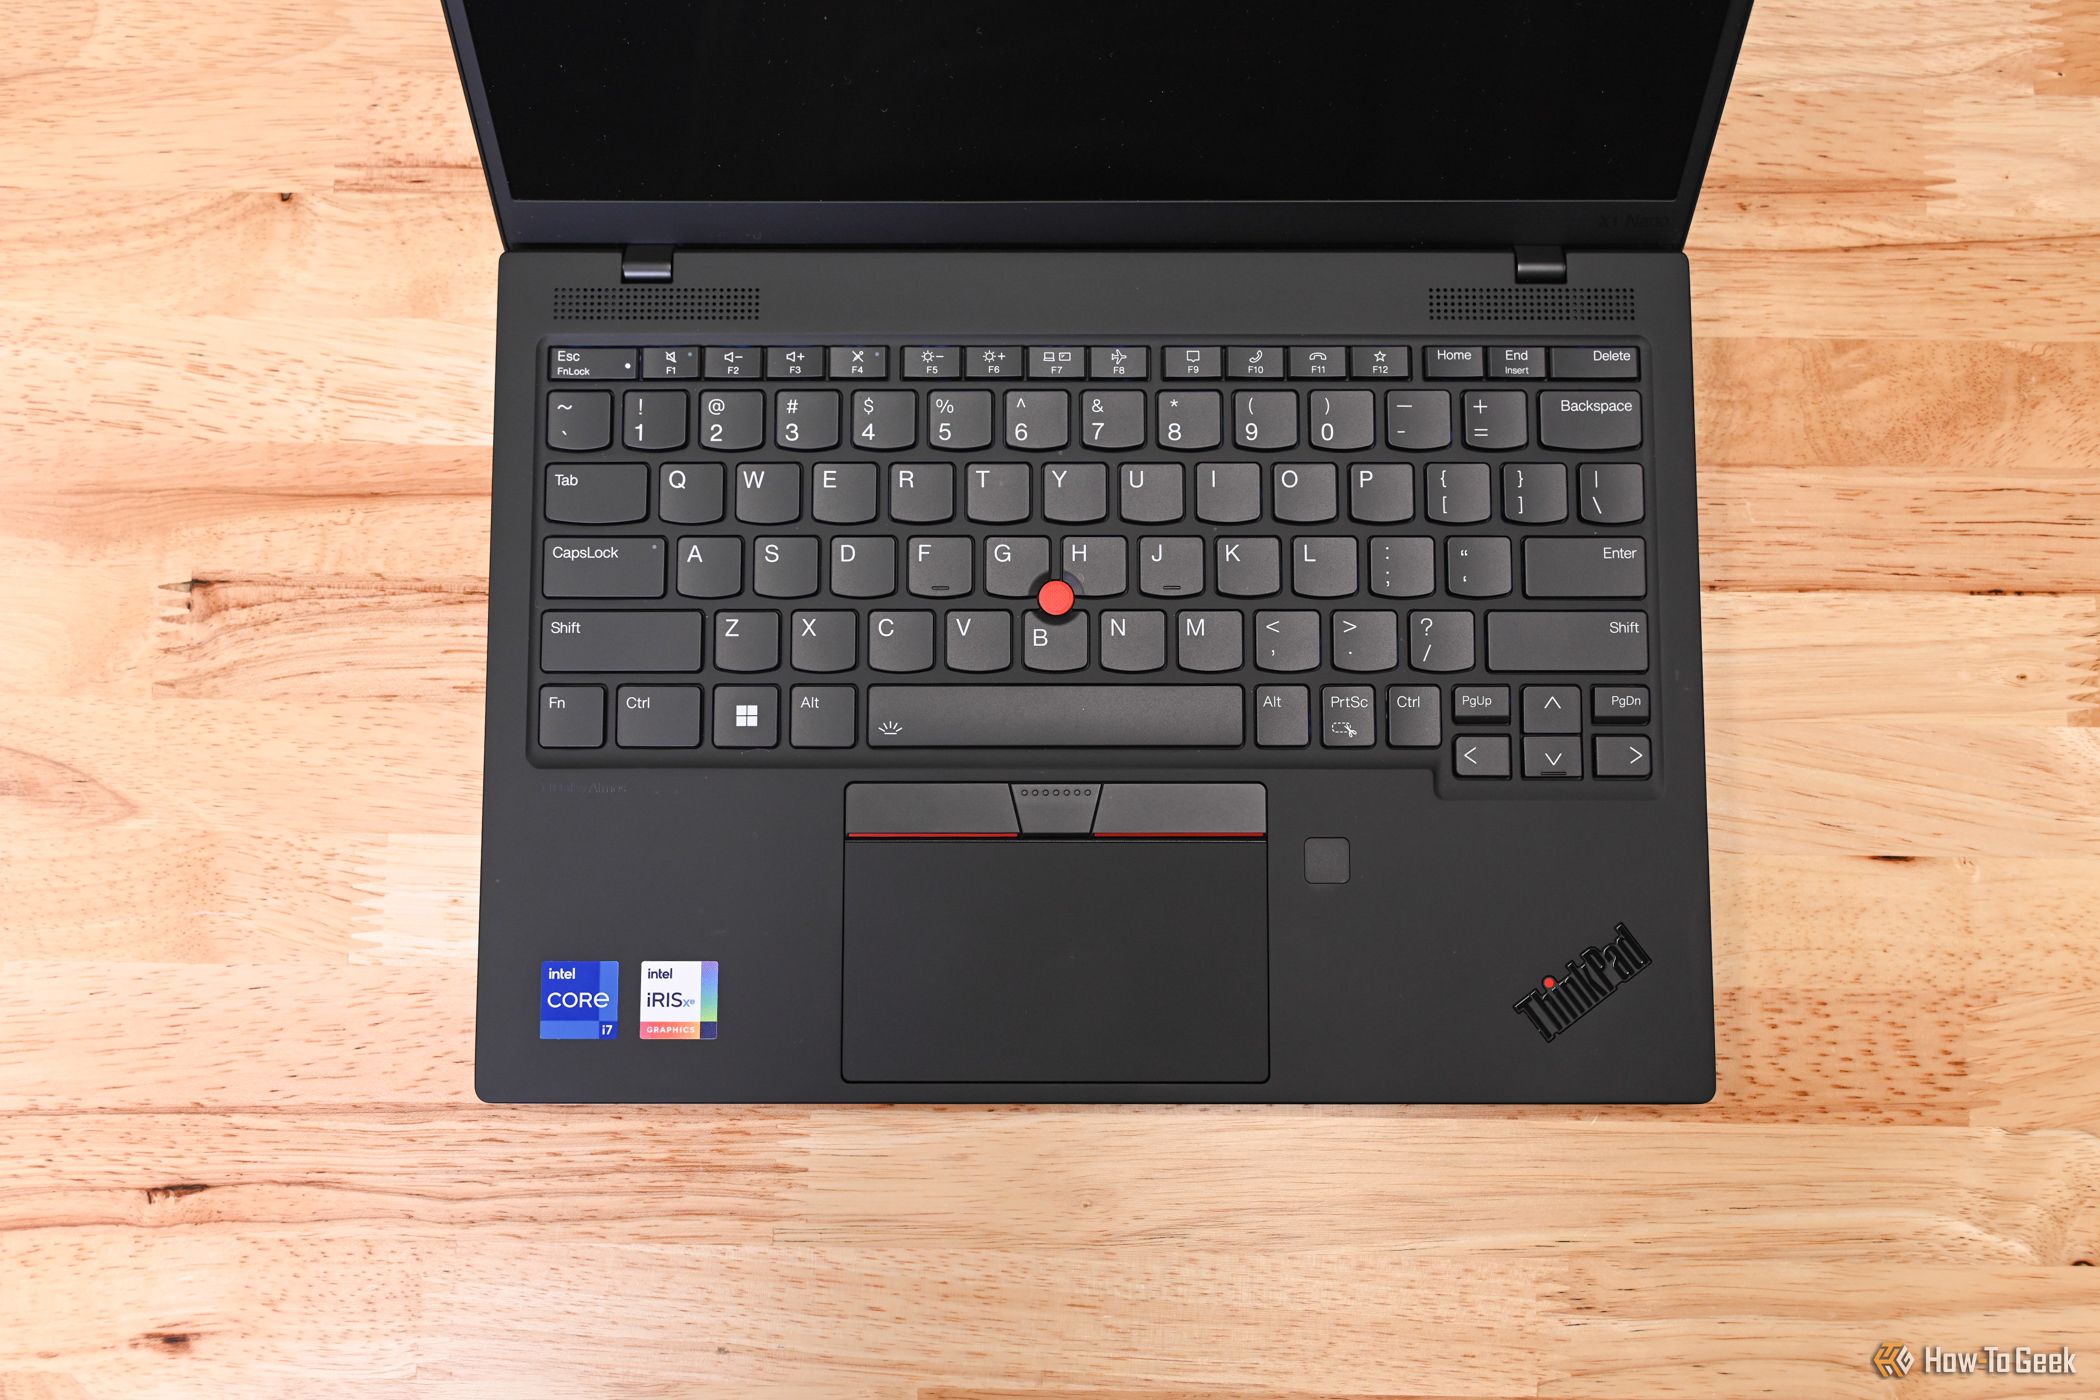 Top view of the keyboard and TrackPad on the Lenovo ThinkPad X1 Nano Gen 3.